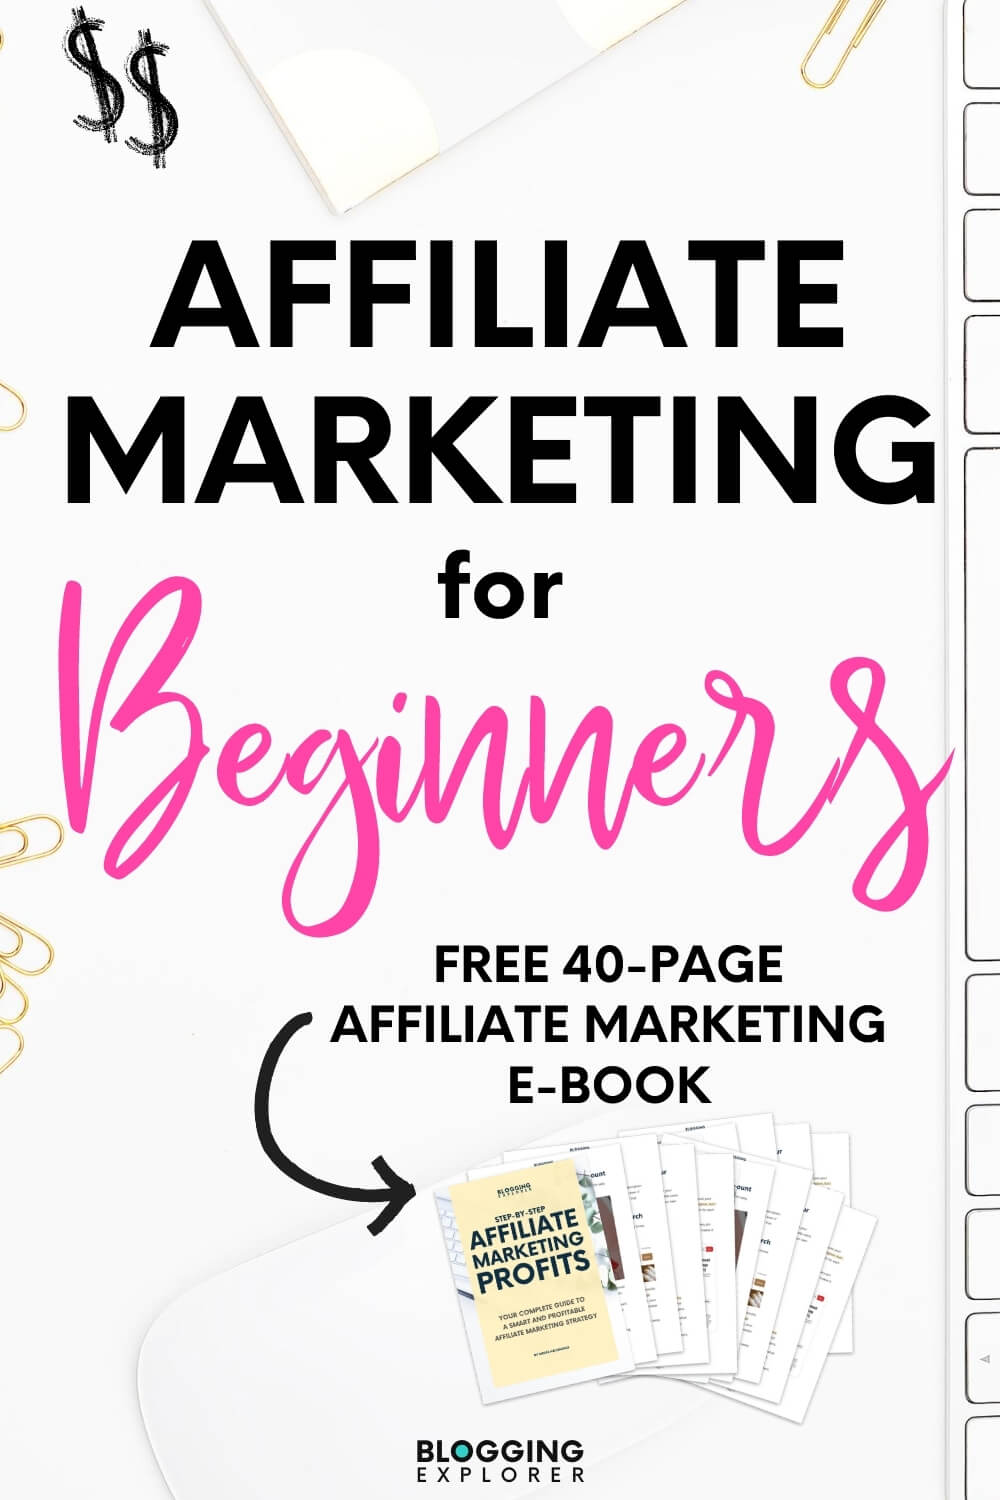 Affiliate Marketing for Dummies in 2023: How to Make Money Step-by-Step